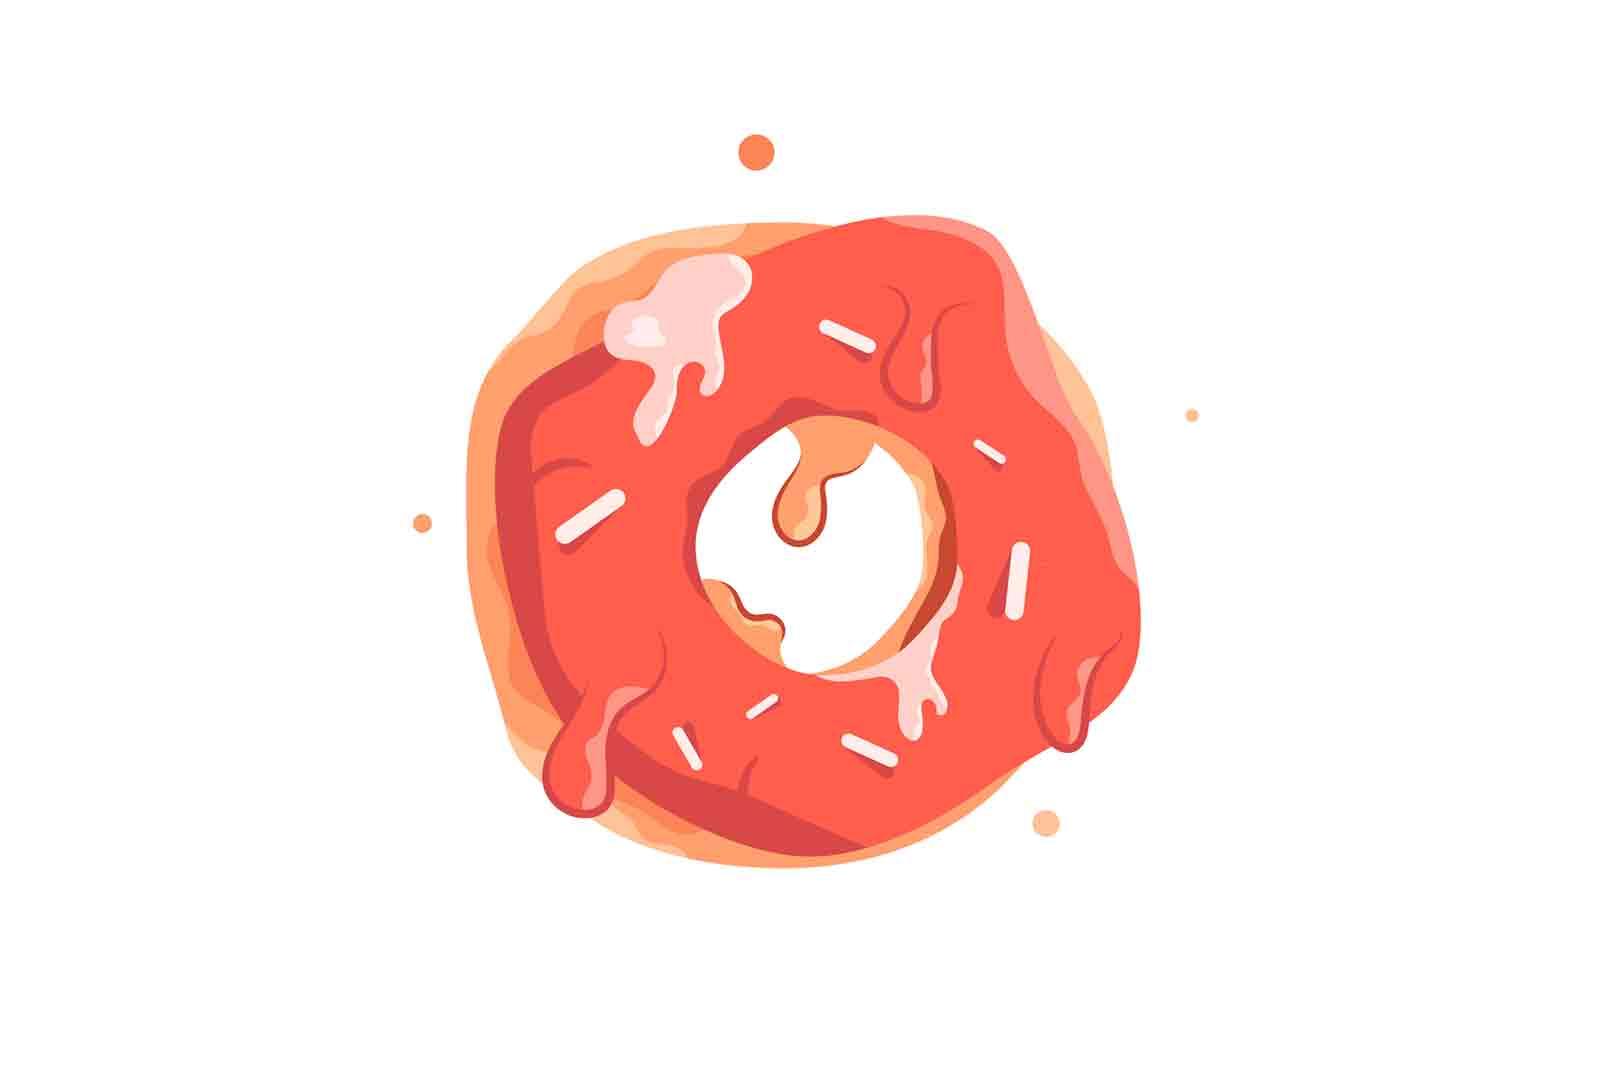 Glazed donut icon with sprinkles isolated on white background, flat vector illustration.